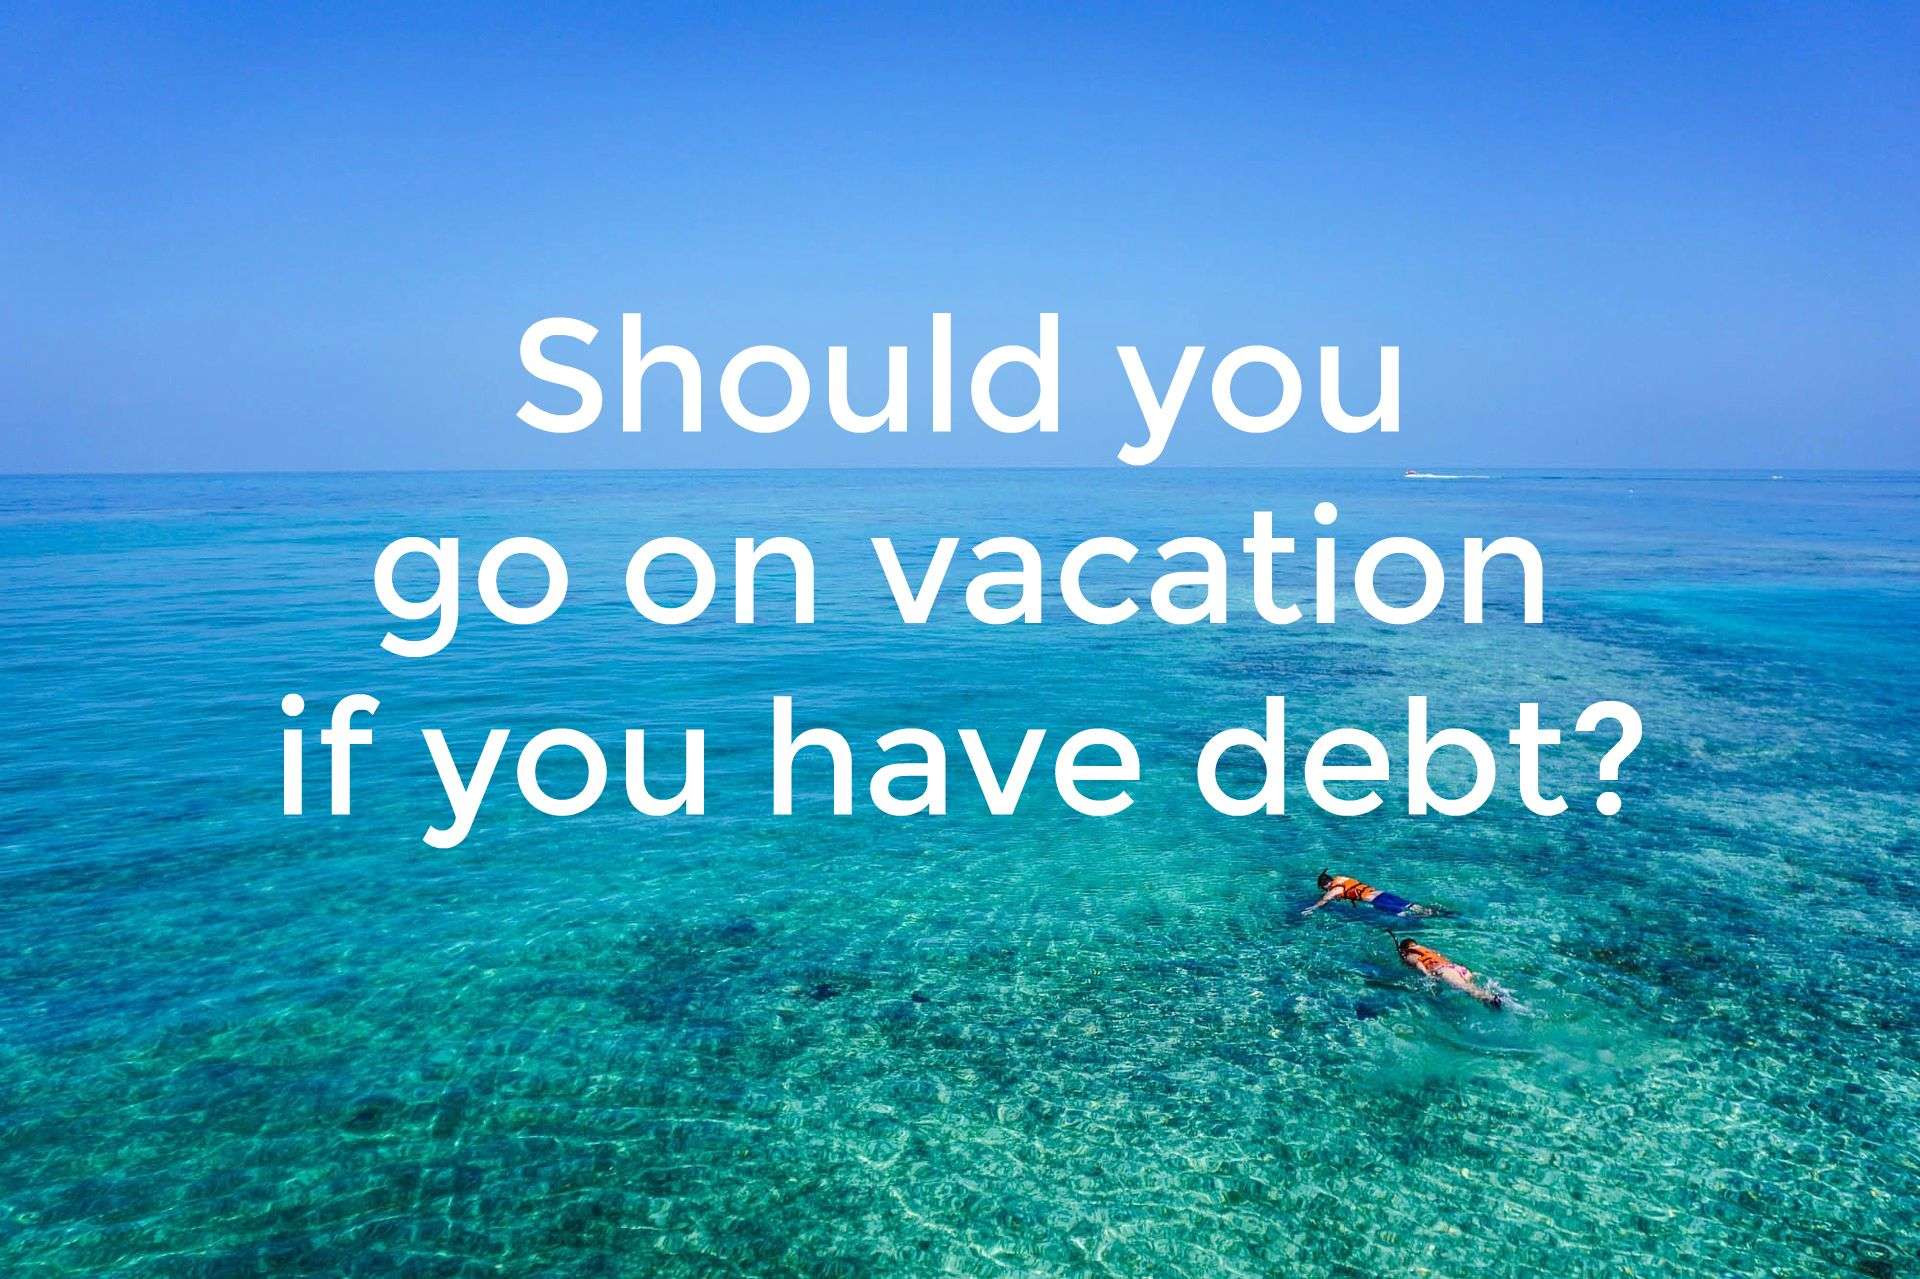 Should you go on vacation if you have debt?